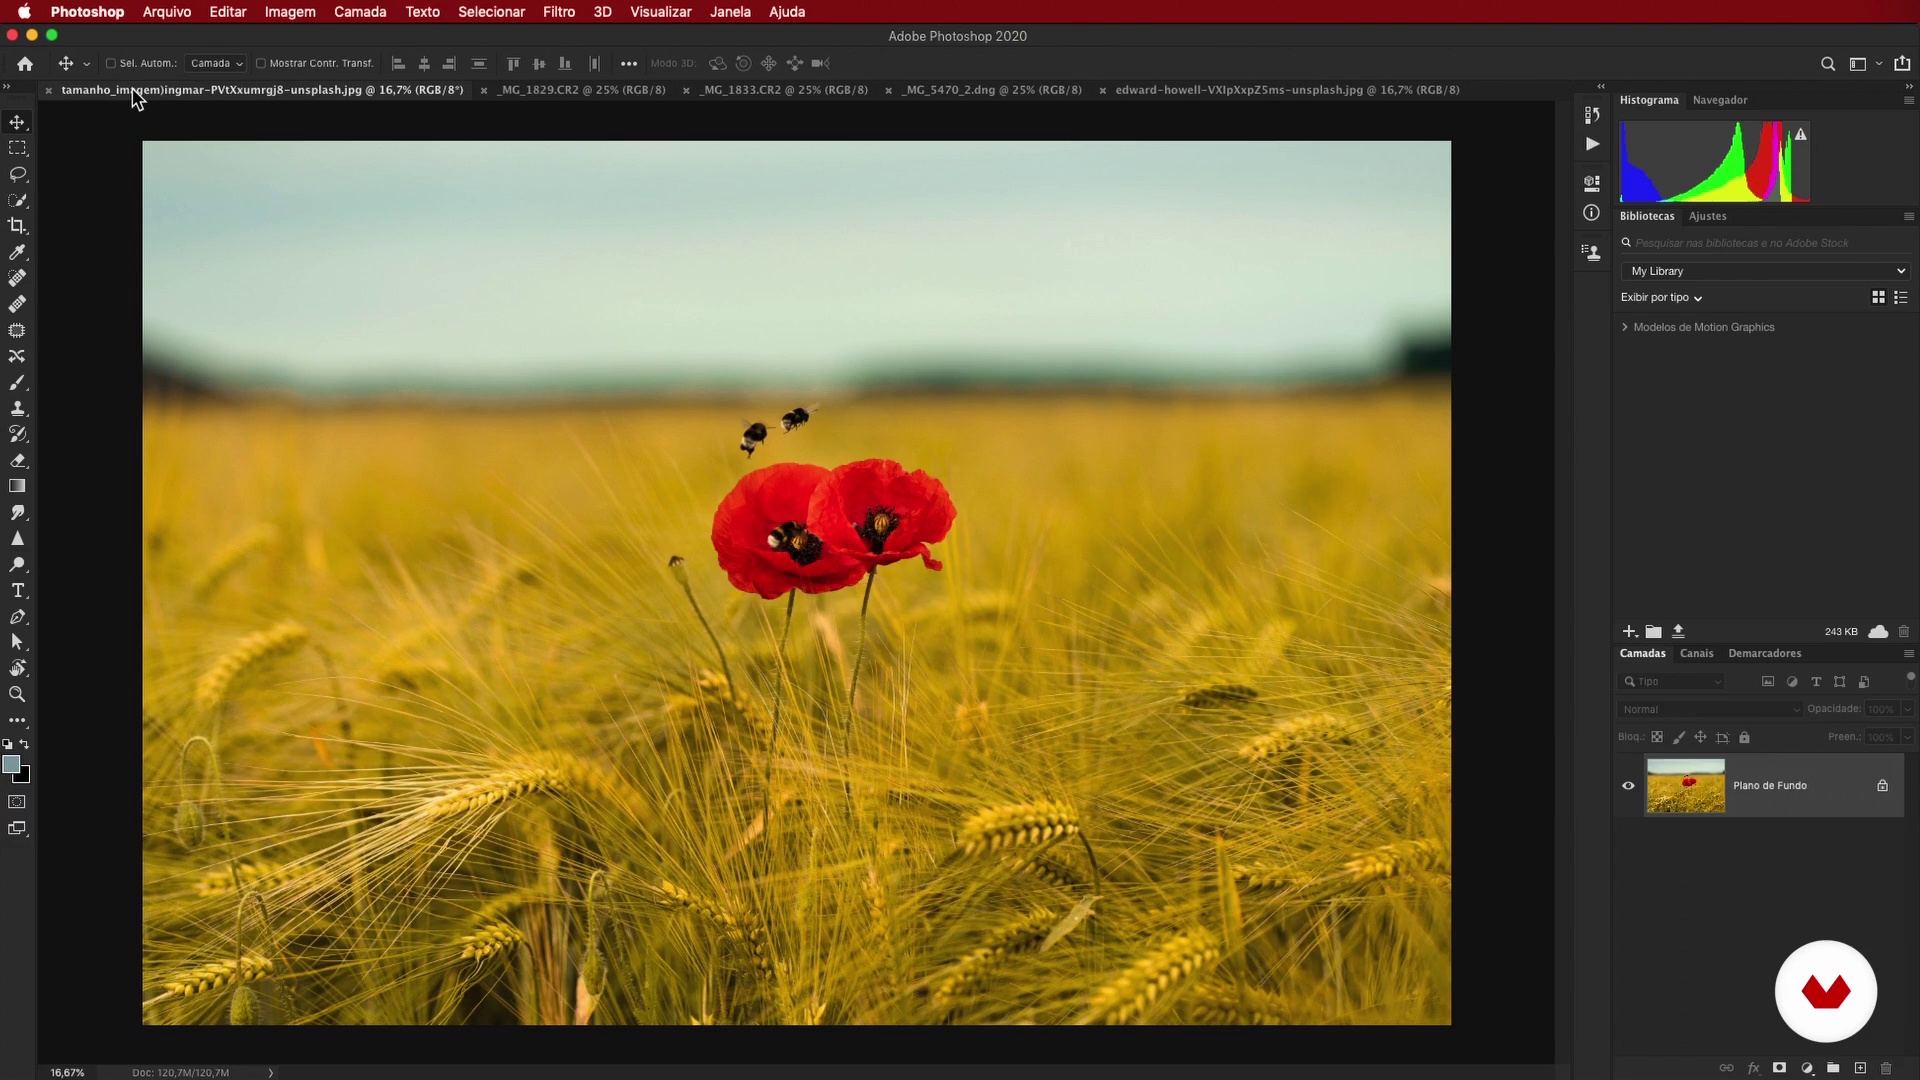 adobe photoshop 8.0 free download for windows 7